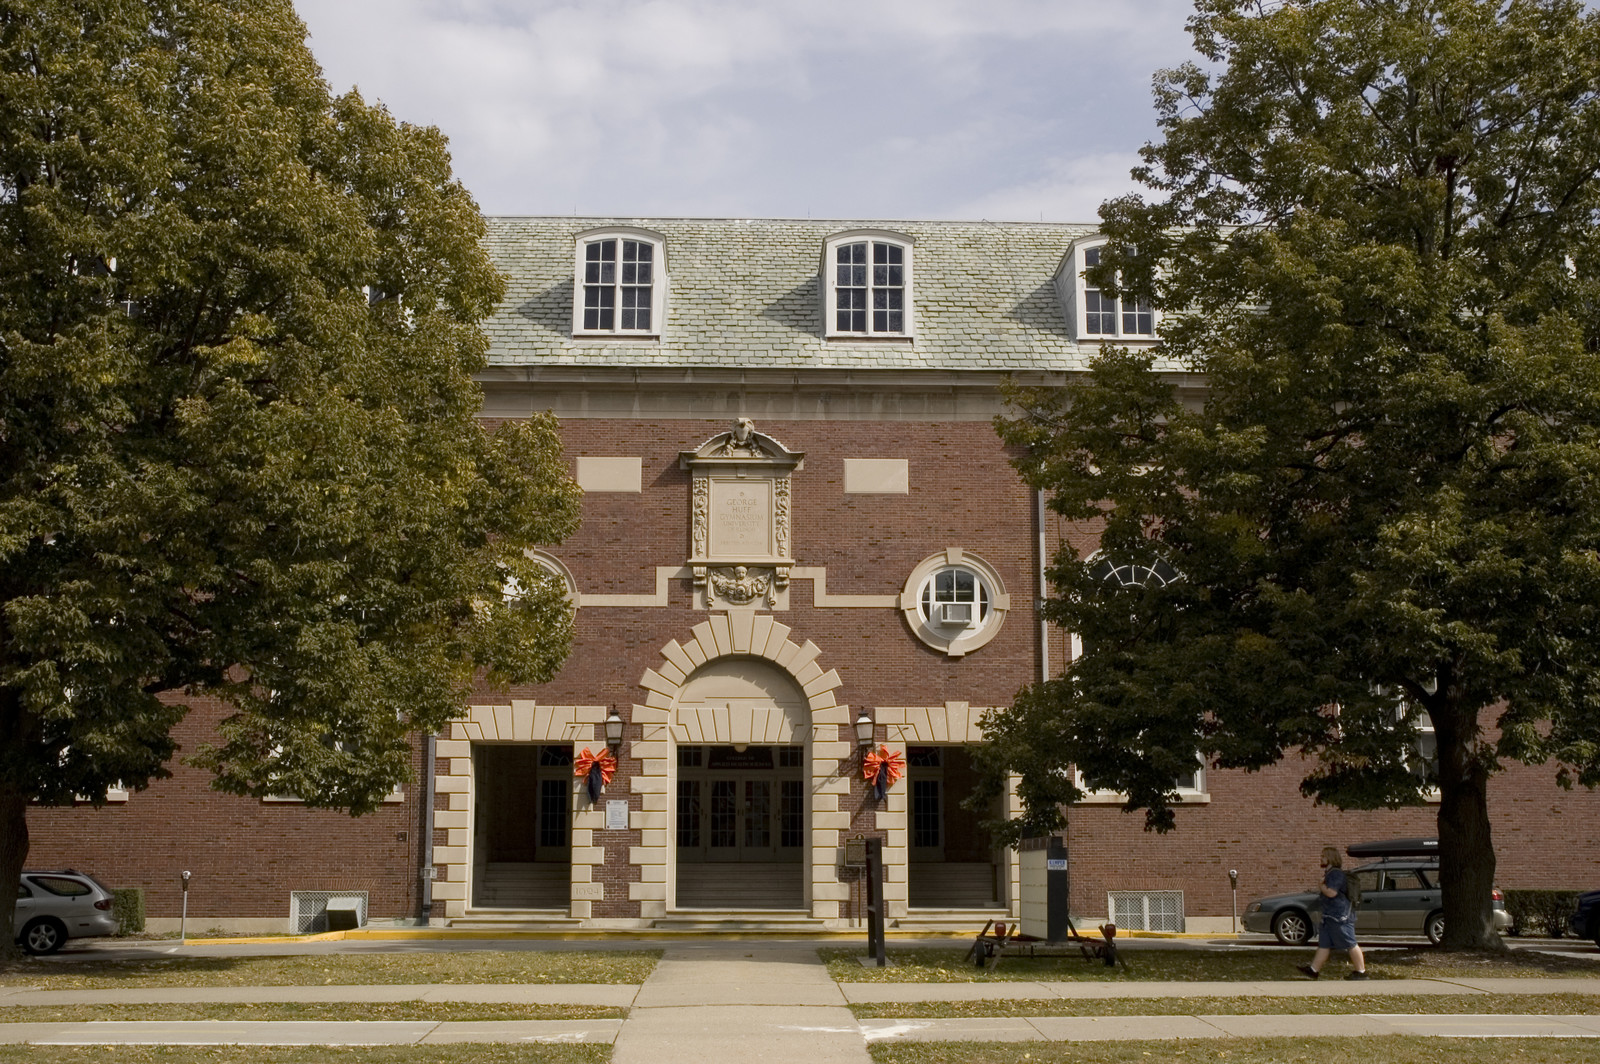 Huff Hall on the University of Illinois campus in champaign